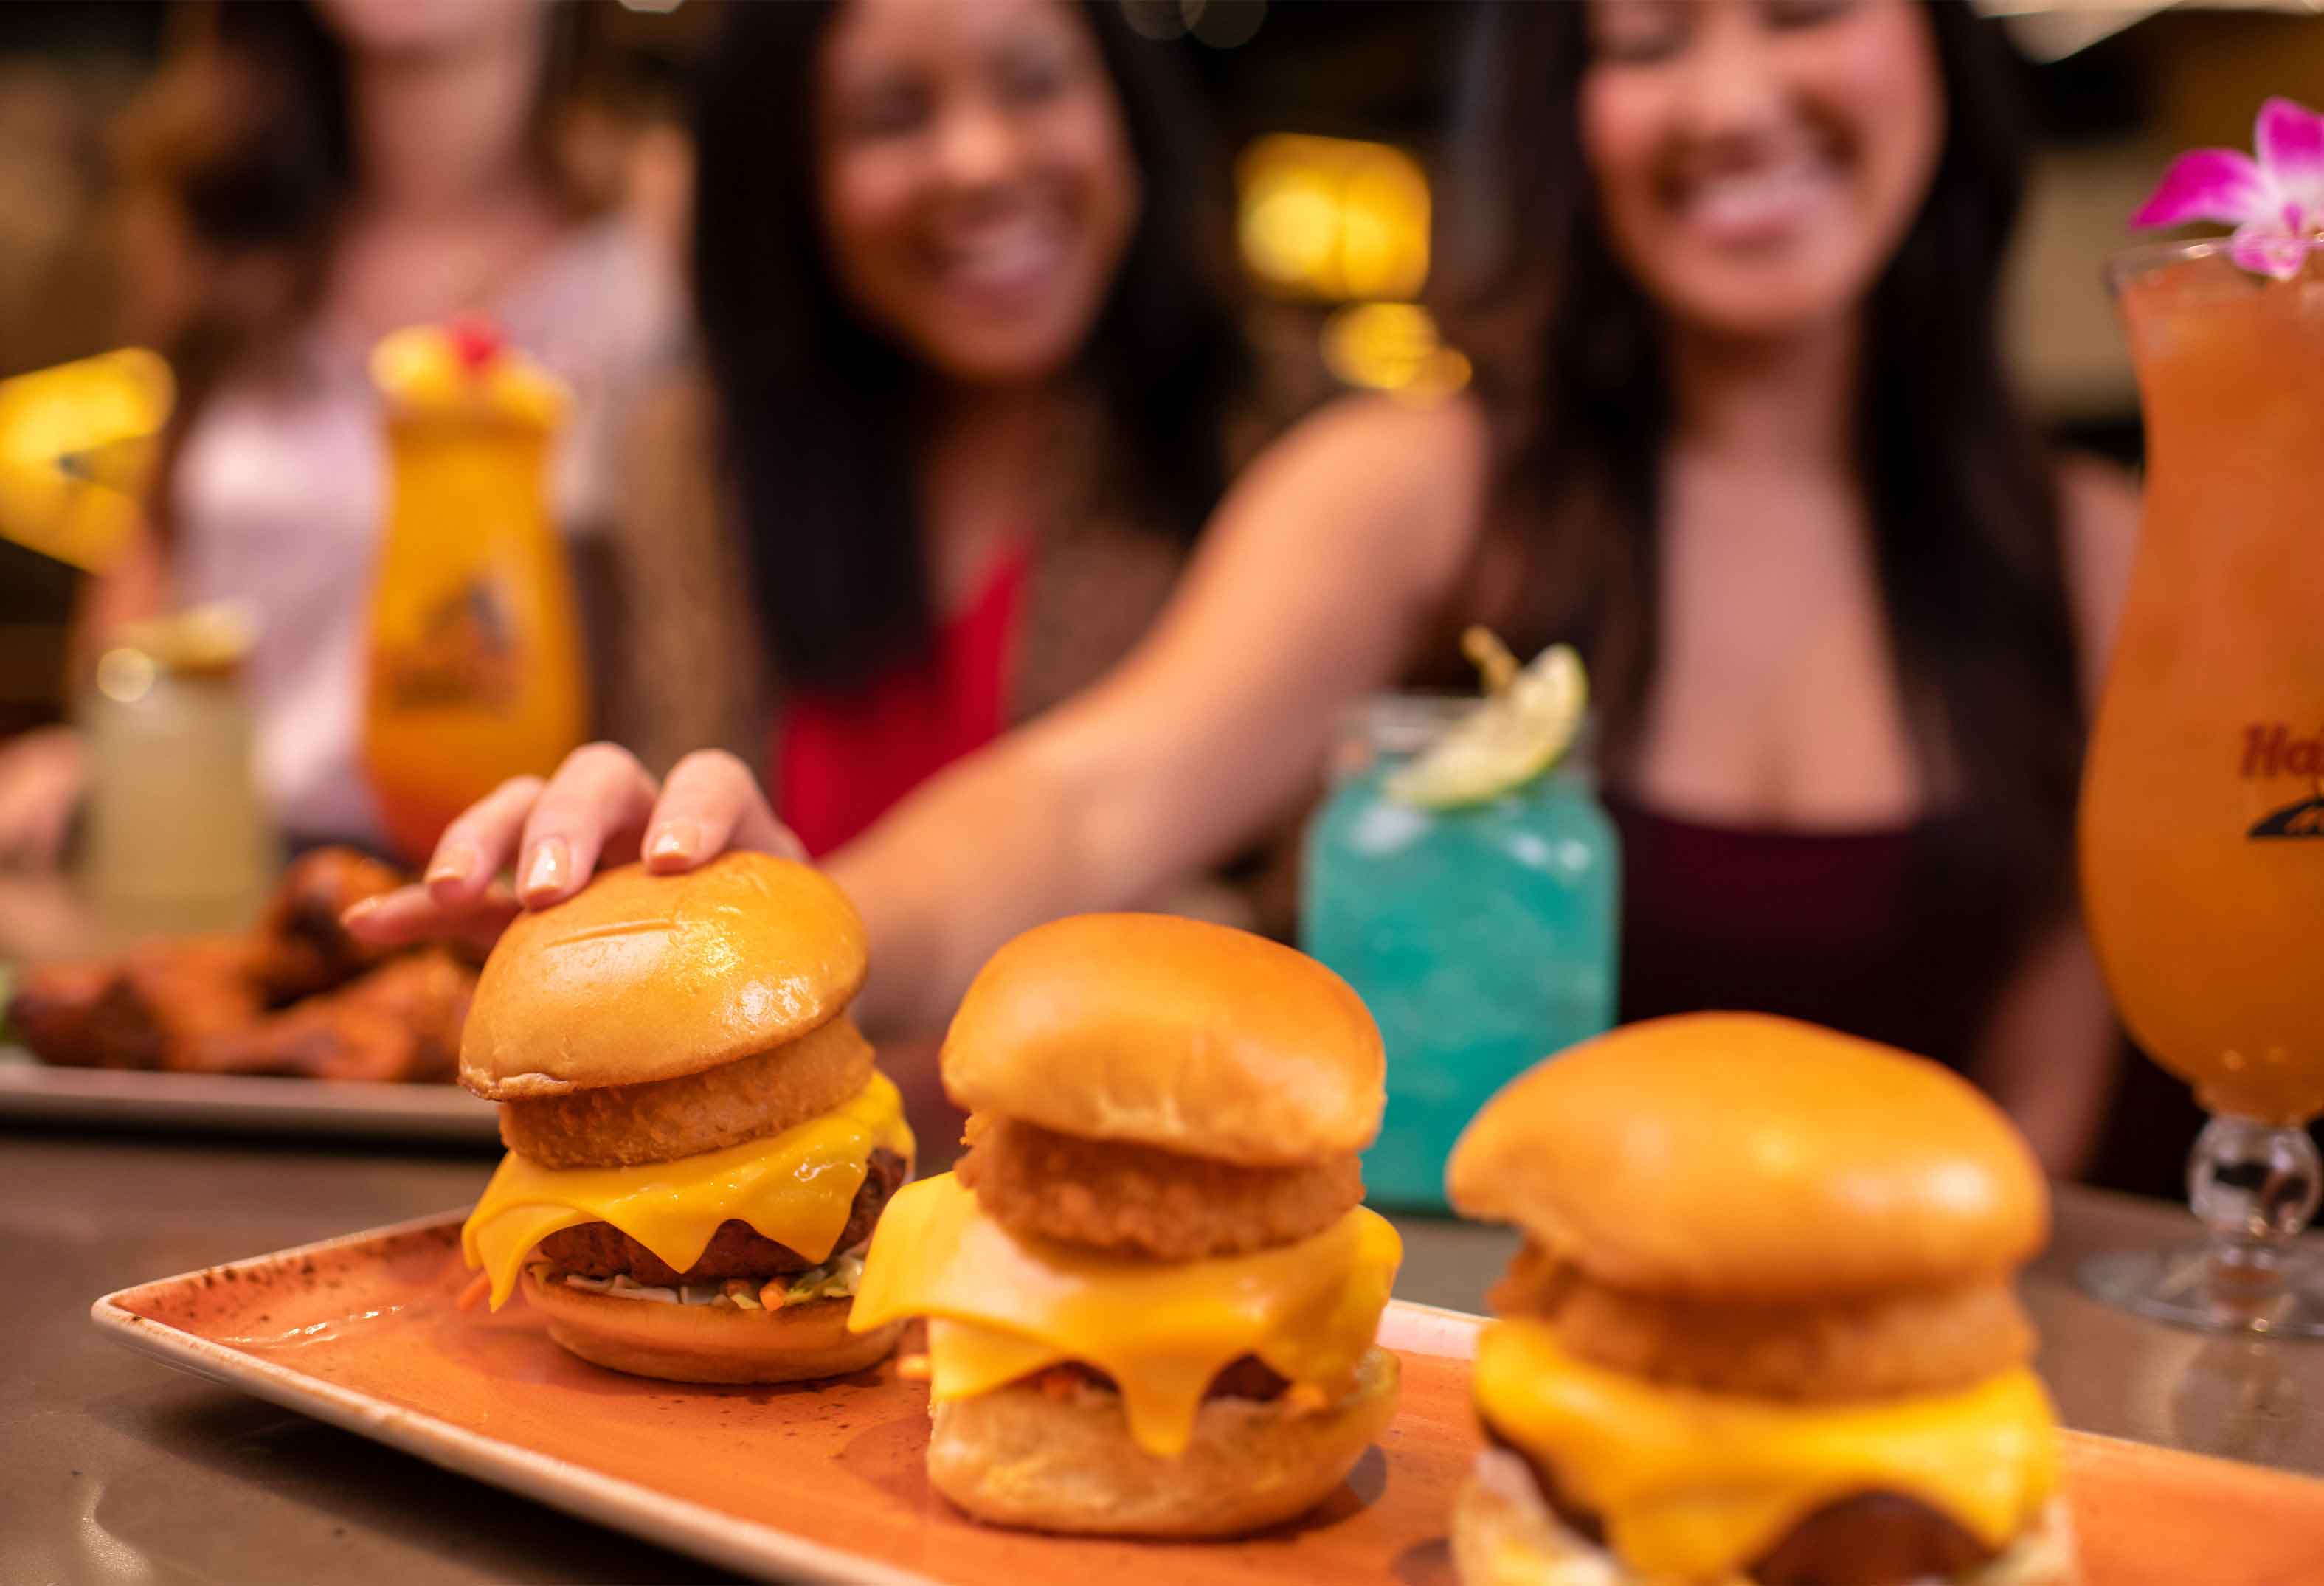 Group of Women Enjoying Burgers and Cocktails at Hard Rock Cafe